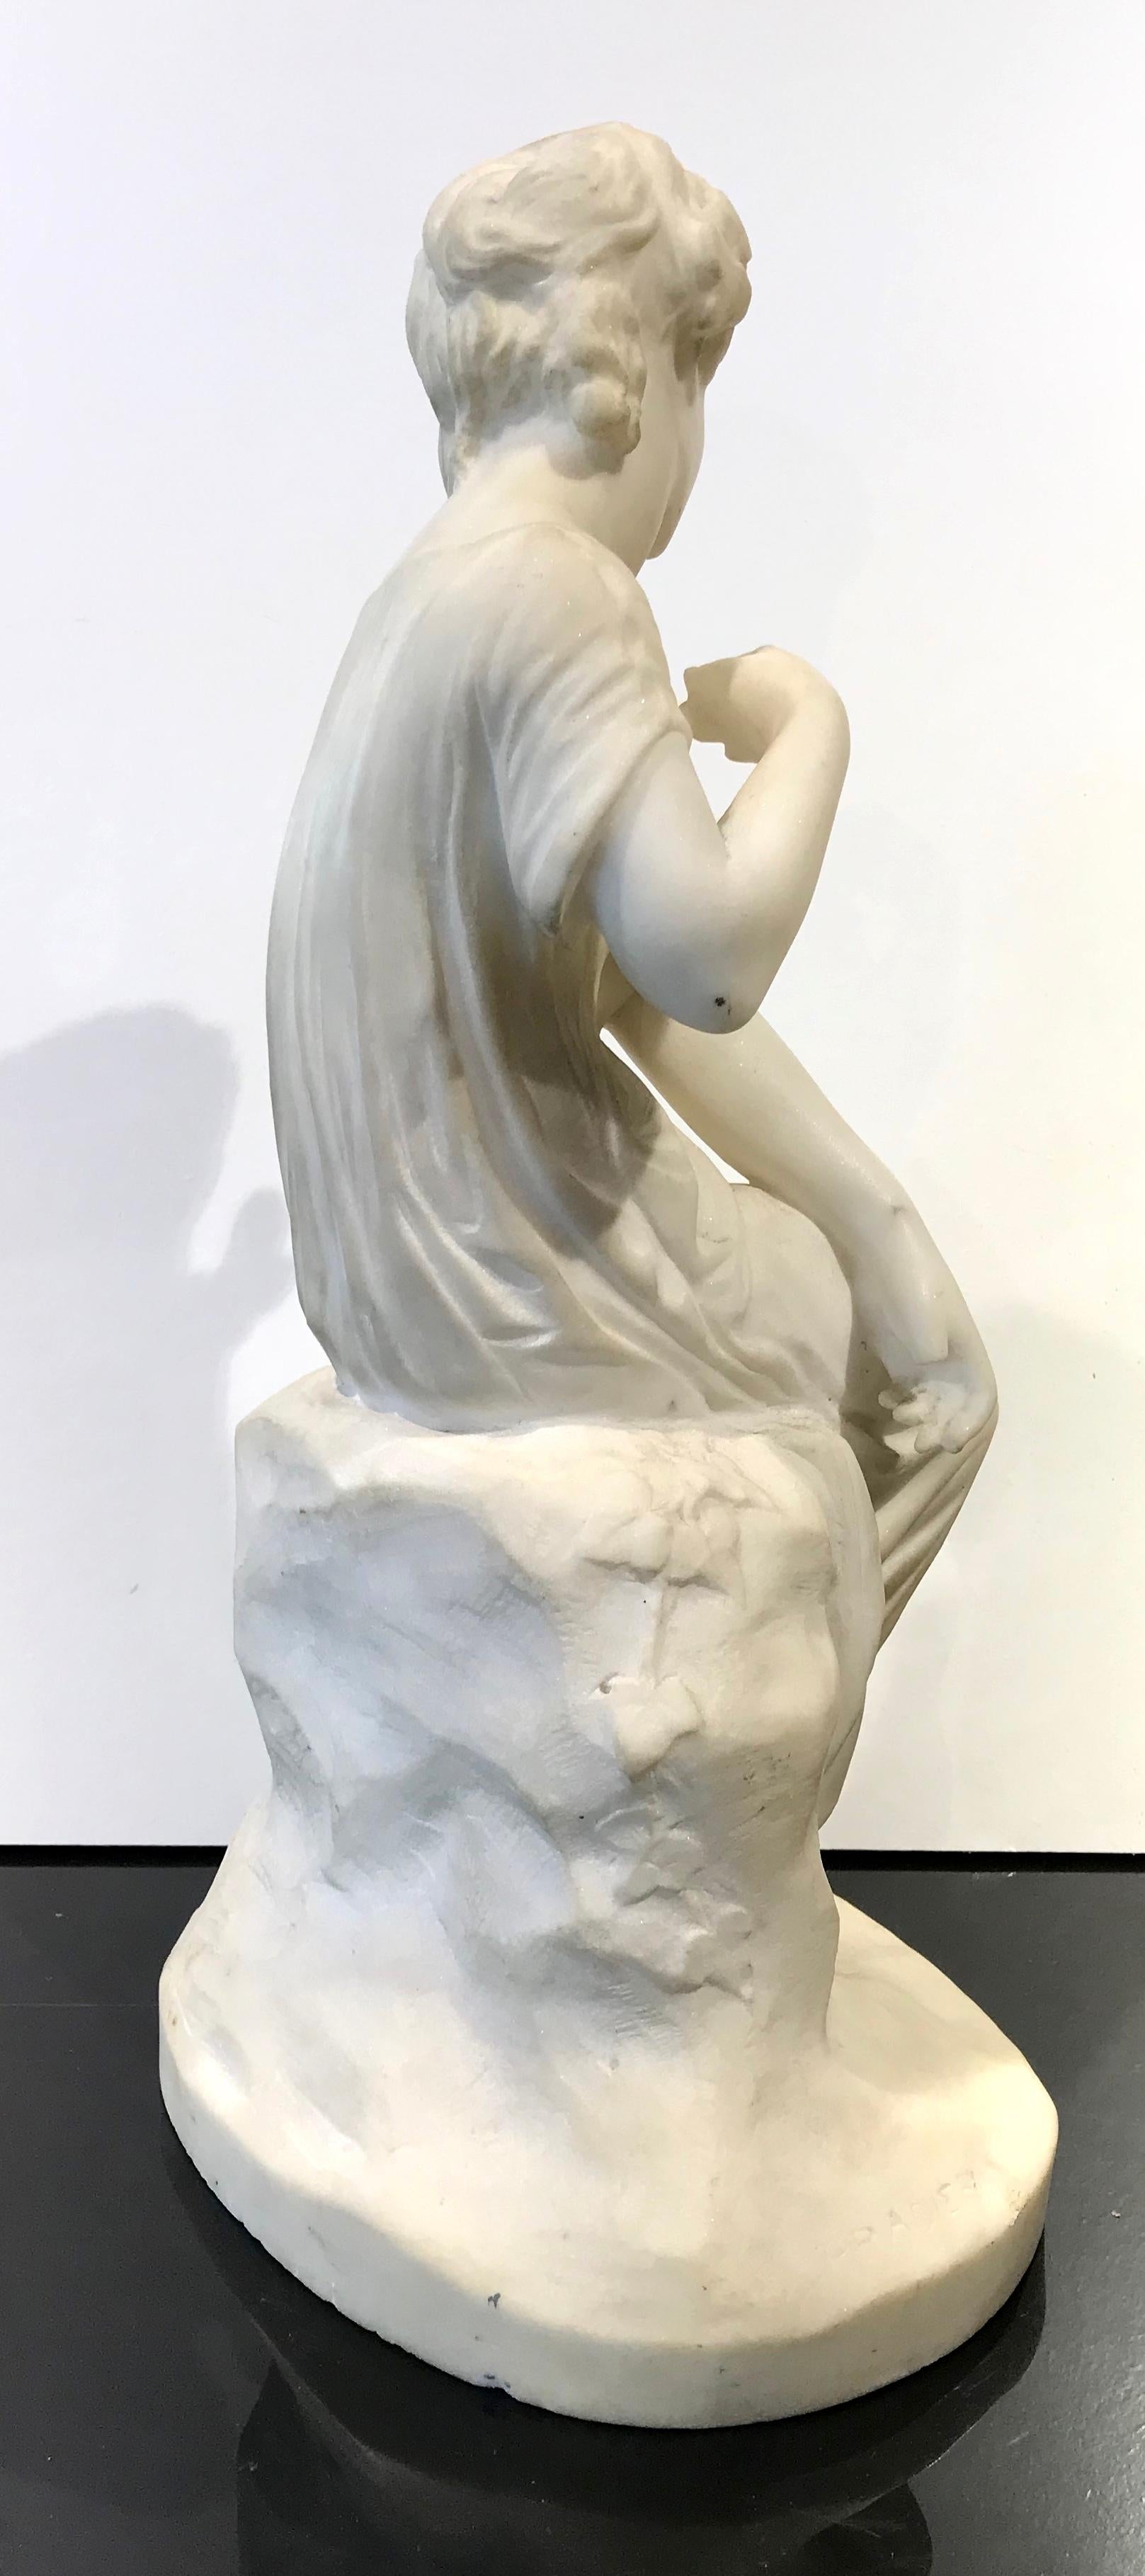 19th Century French Marble Sculpture of Psyche by James Pradier Signed 1